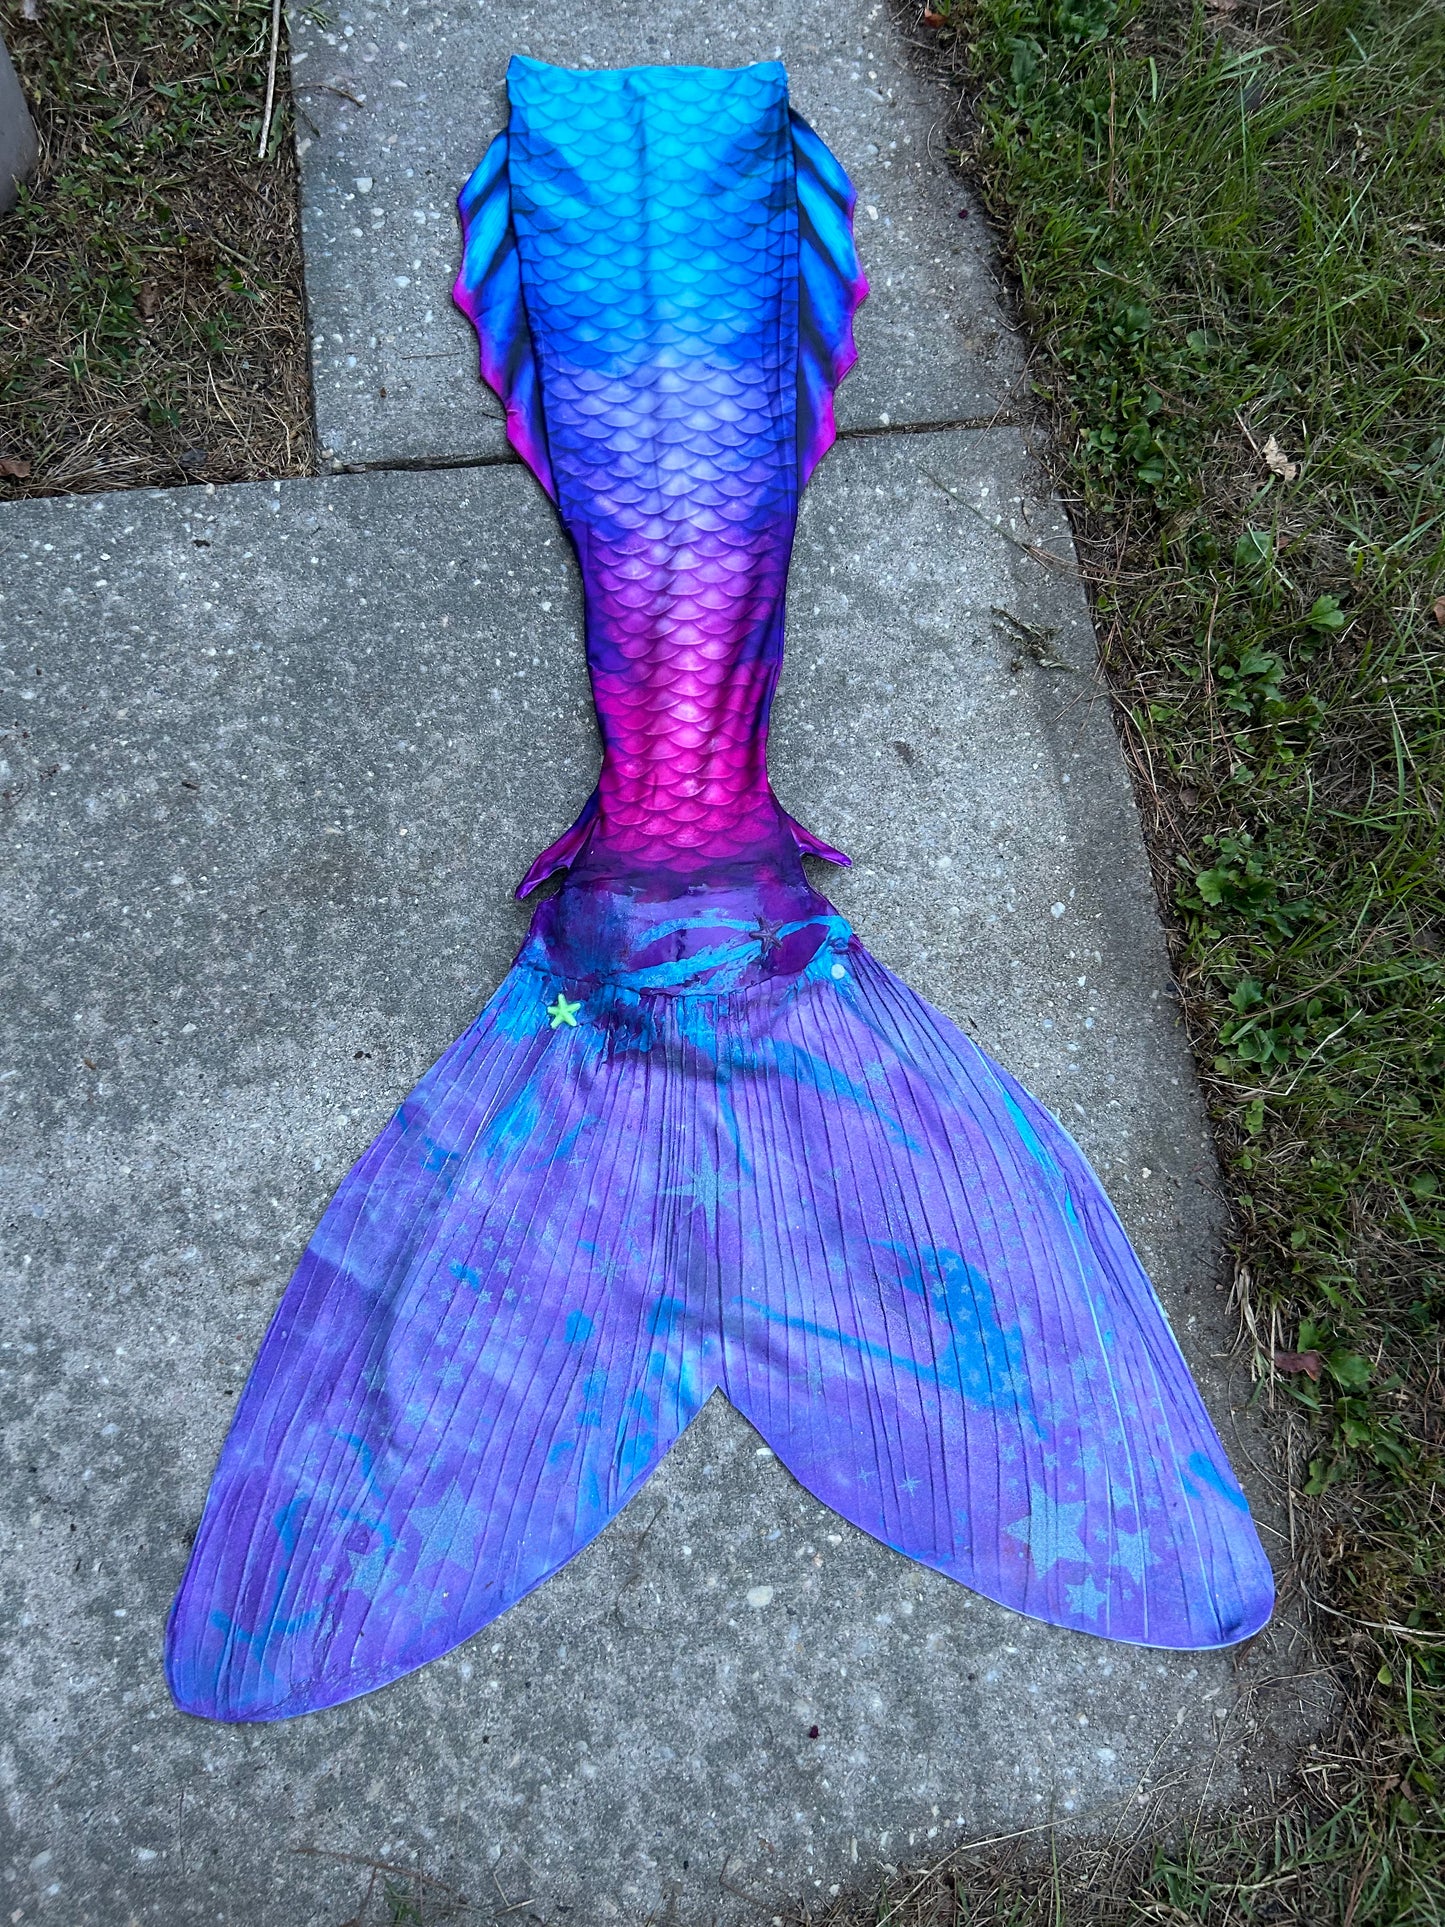 Galaxy glow in the dark Mermaid Tail hybrid tail - barely used personal tail- ready to ship!